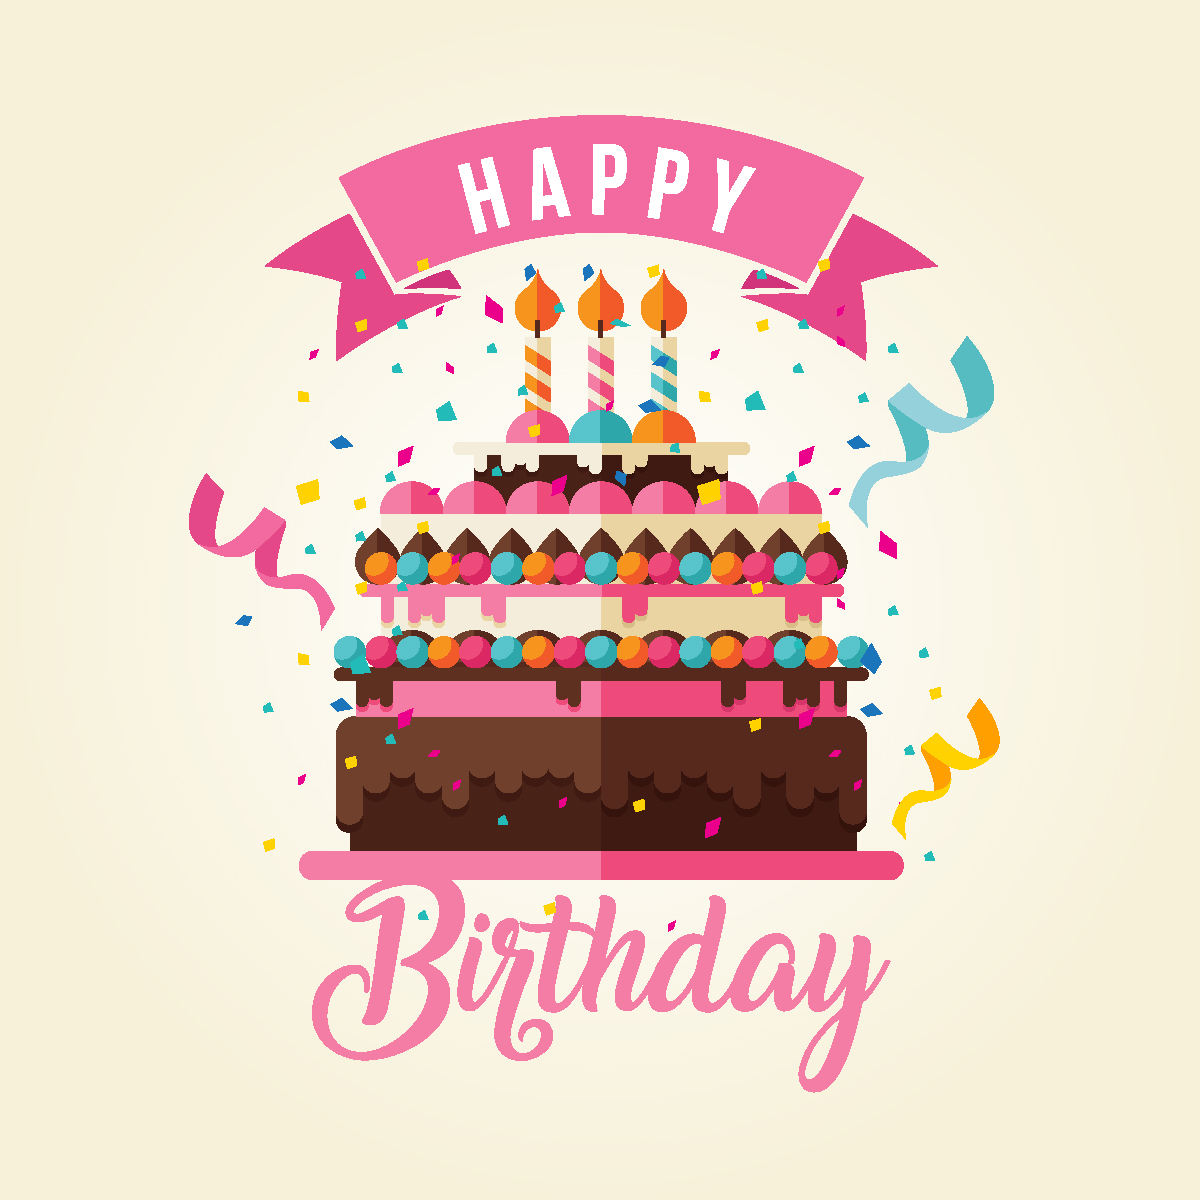 original happy birthday wishes messages and quotes